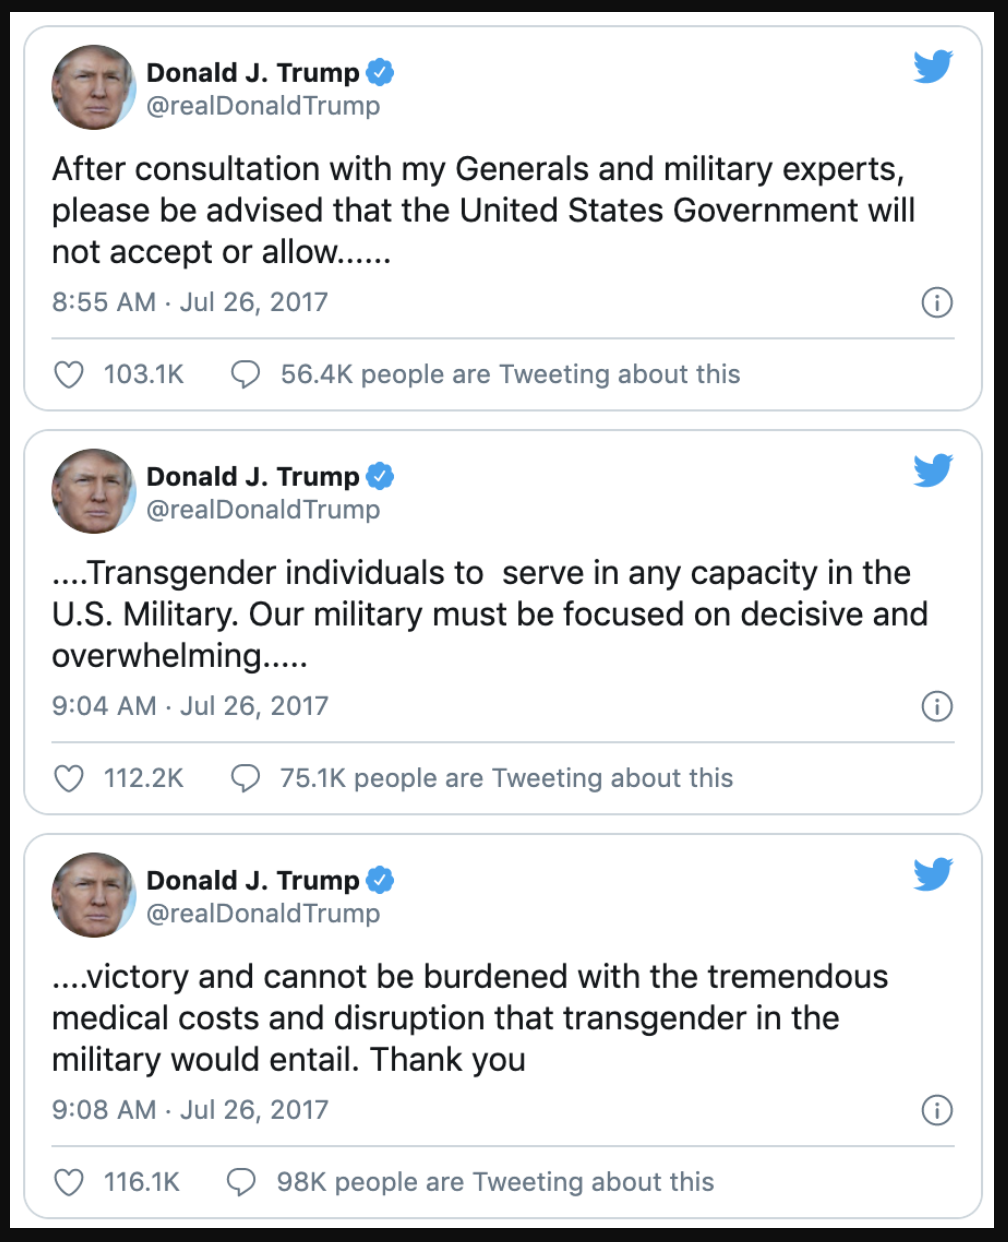 Three Tweets from Donald Trump in July of 2017 announcing that he &quot;will not accept or allow transgender individuals to serve in any capacity in the US military&quot;